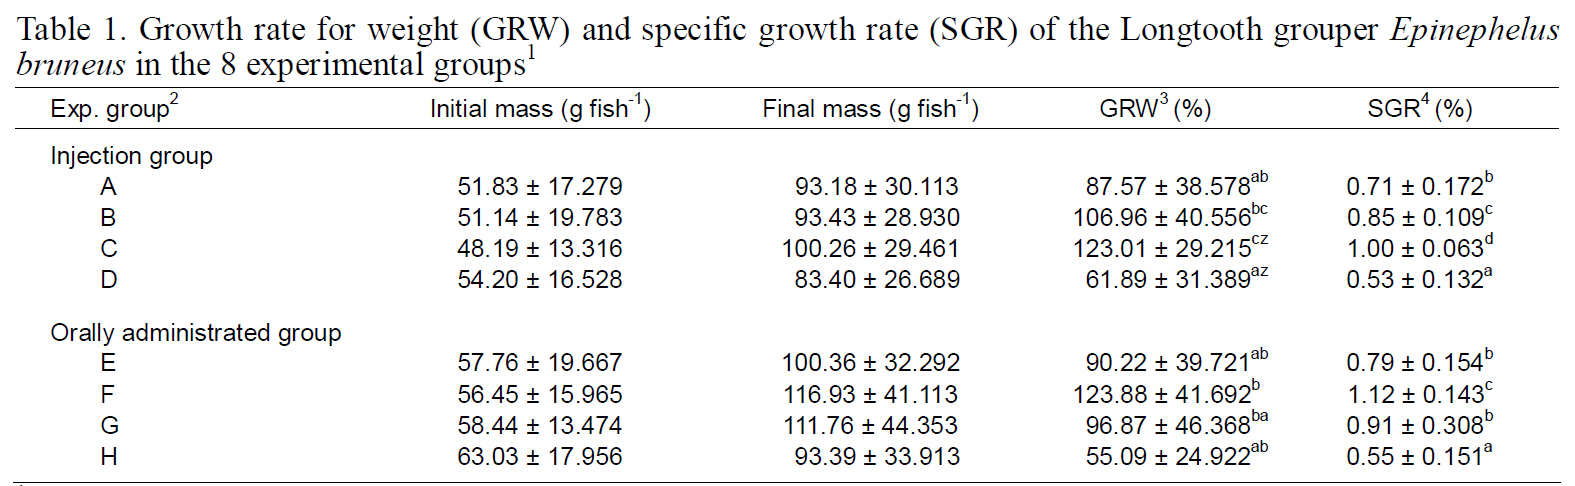 Growth rate for weight (GRW) and specific growth rate (SGR) of the Longtooth grouper Epinephelus bruneus in the 8 experimental groups1